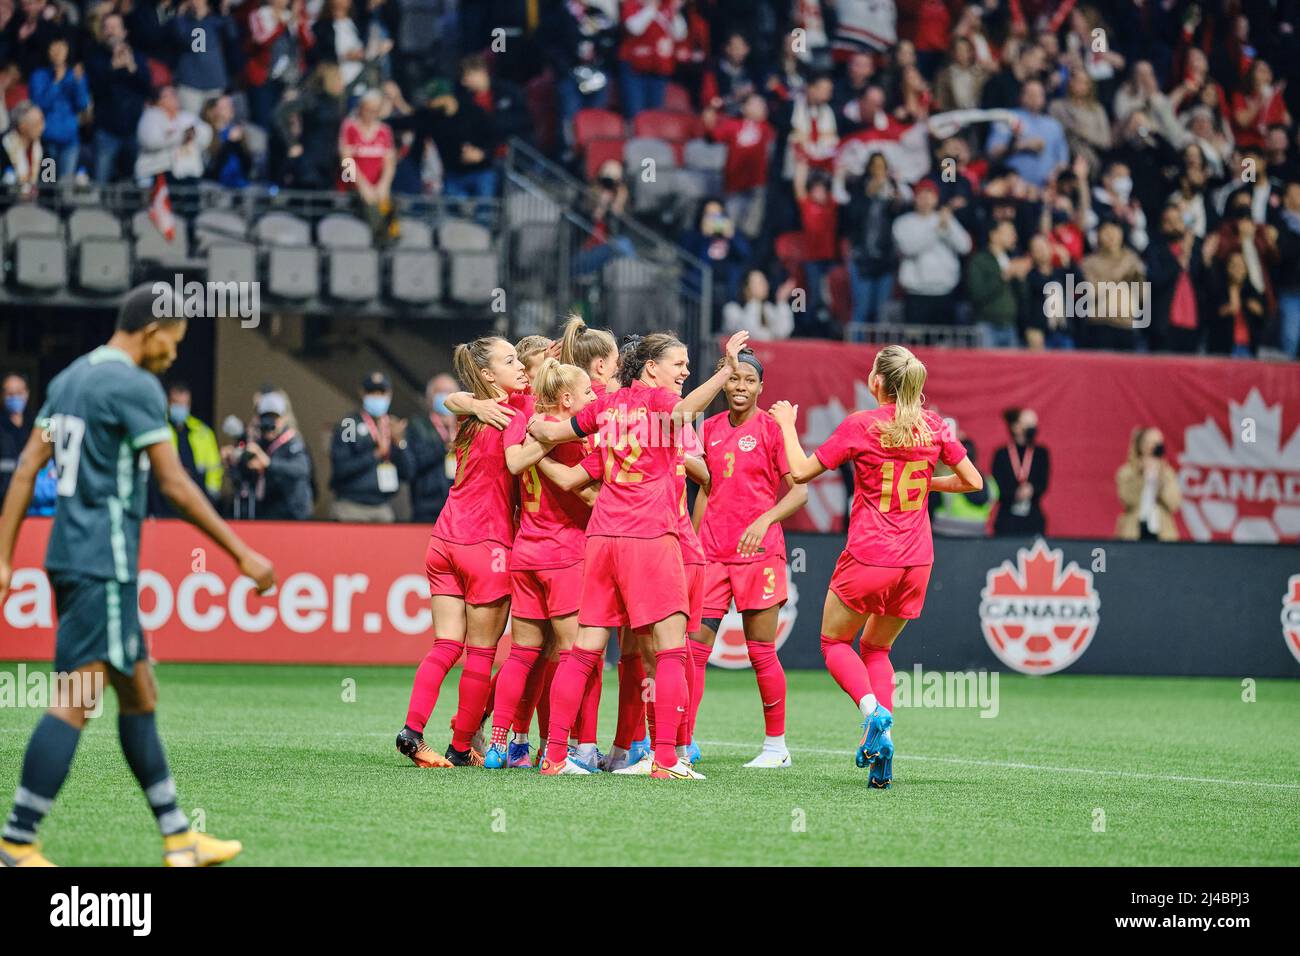 Vancouver, British Columbia, Canada. 8th April, 2022. Team Canada celebrate a goal during the first Canada Soccer’s Women’s National Team Celebration Stock Photo